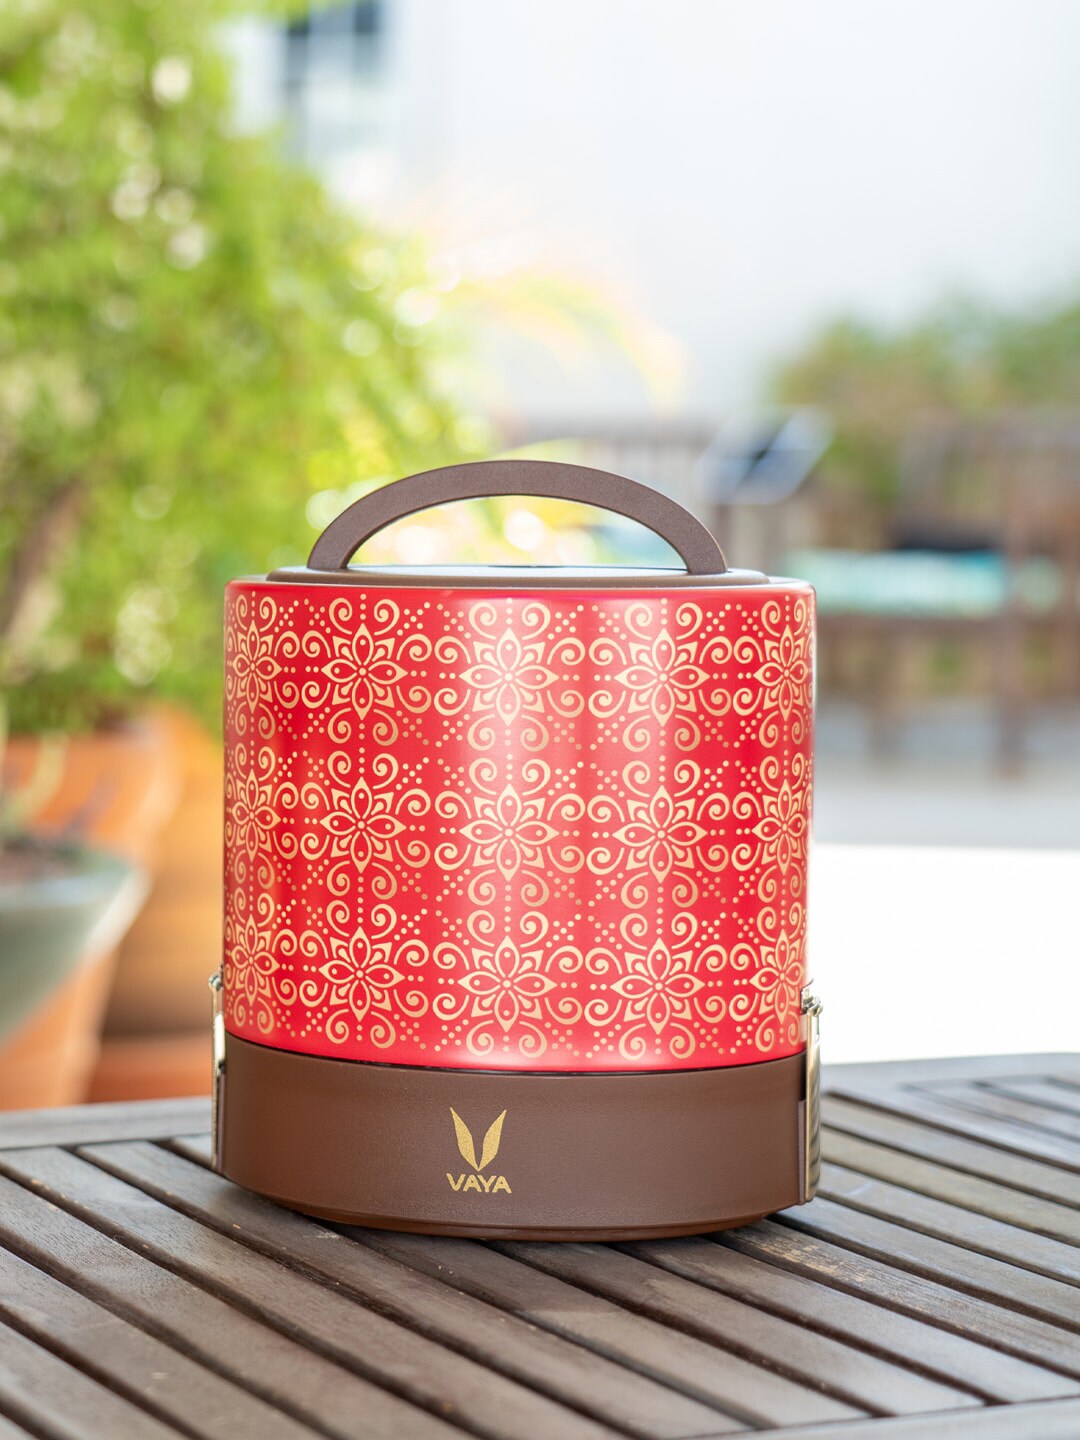 Vaya Red Printed Advanced Technology Lunch Box - 1000Ml Price in India